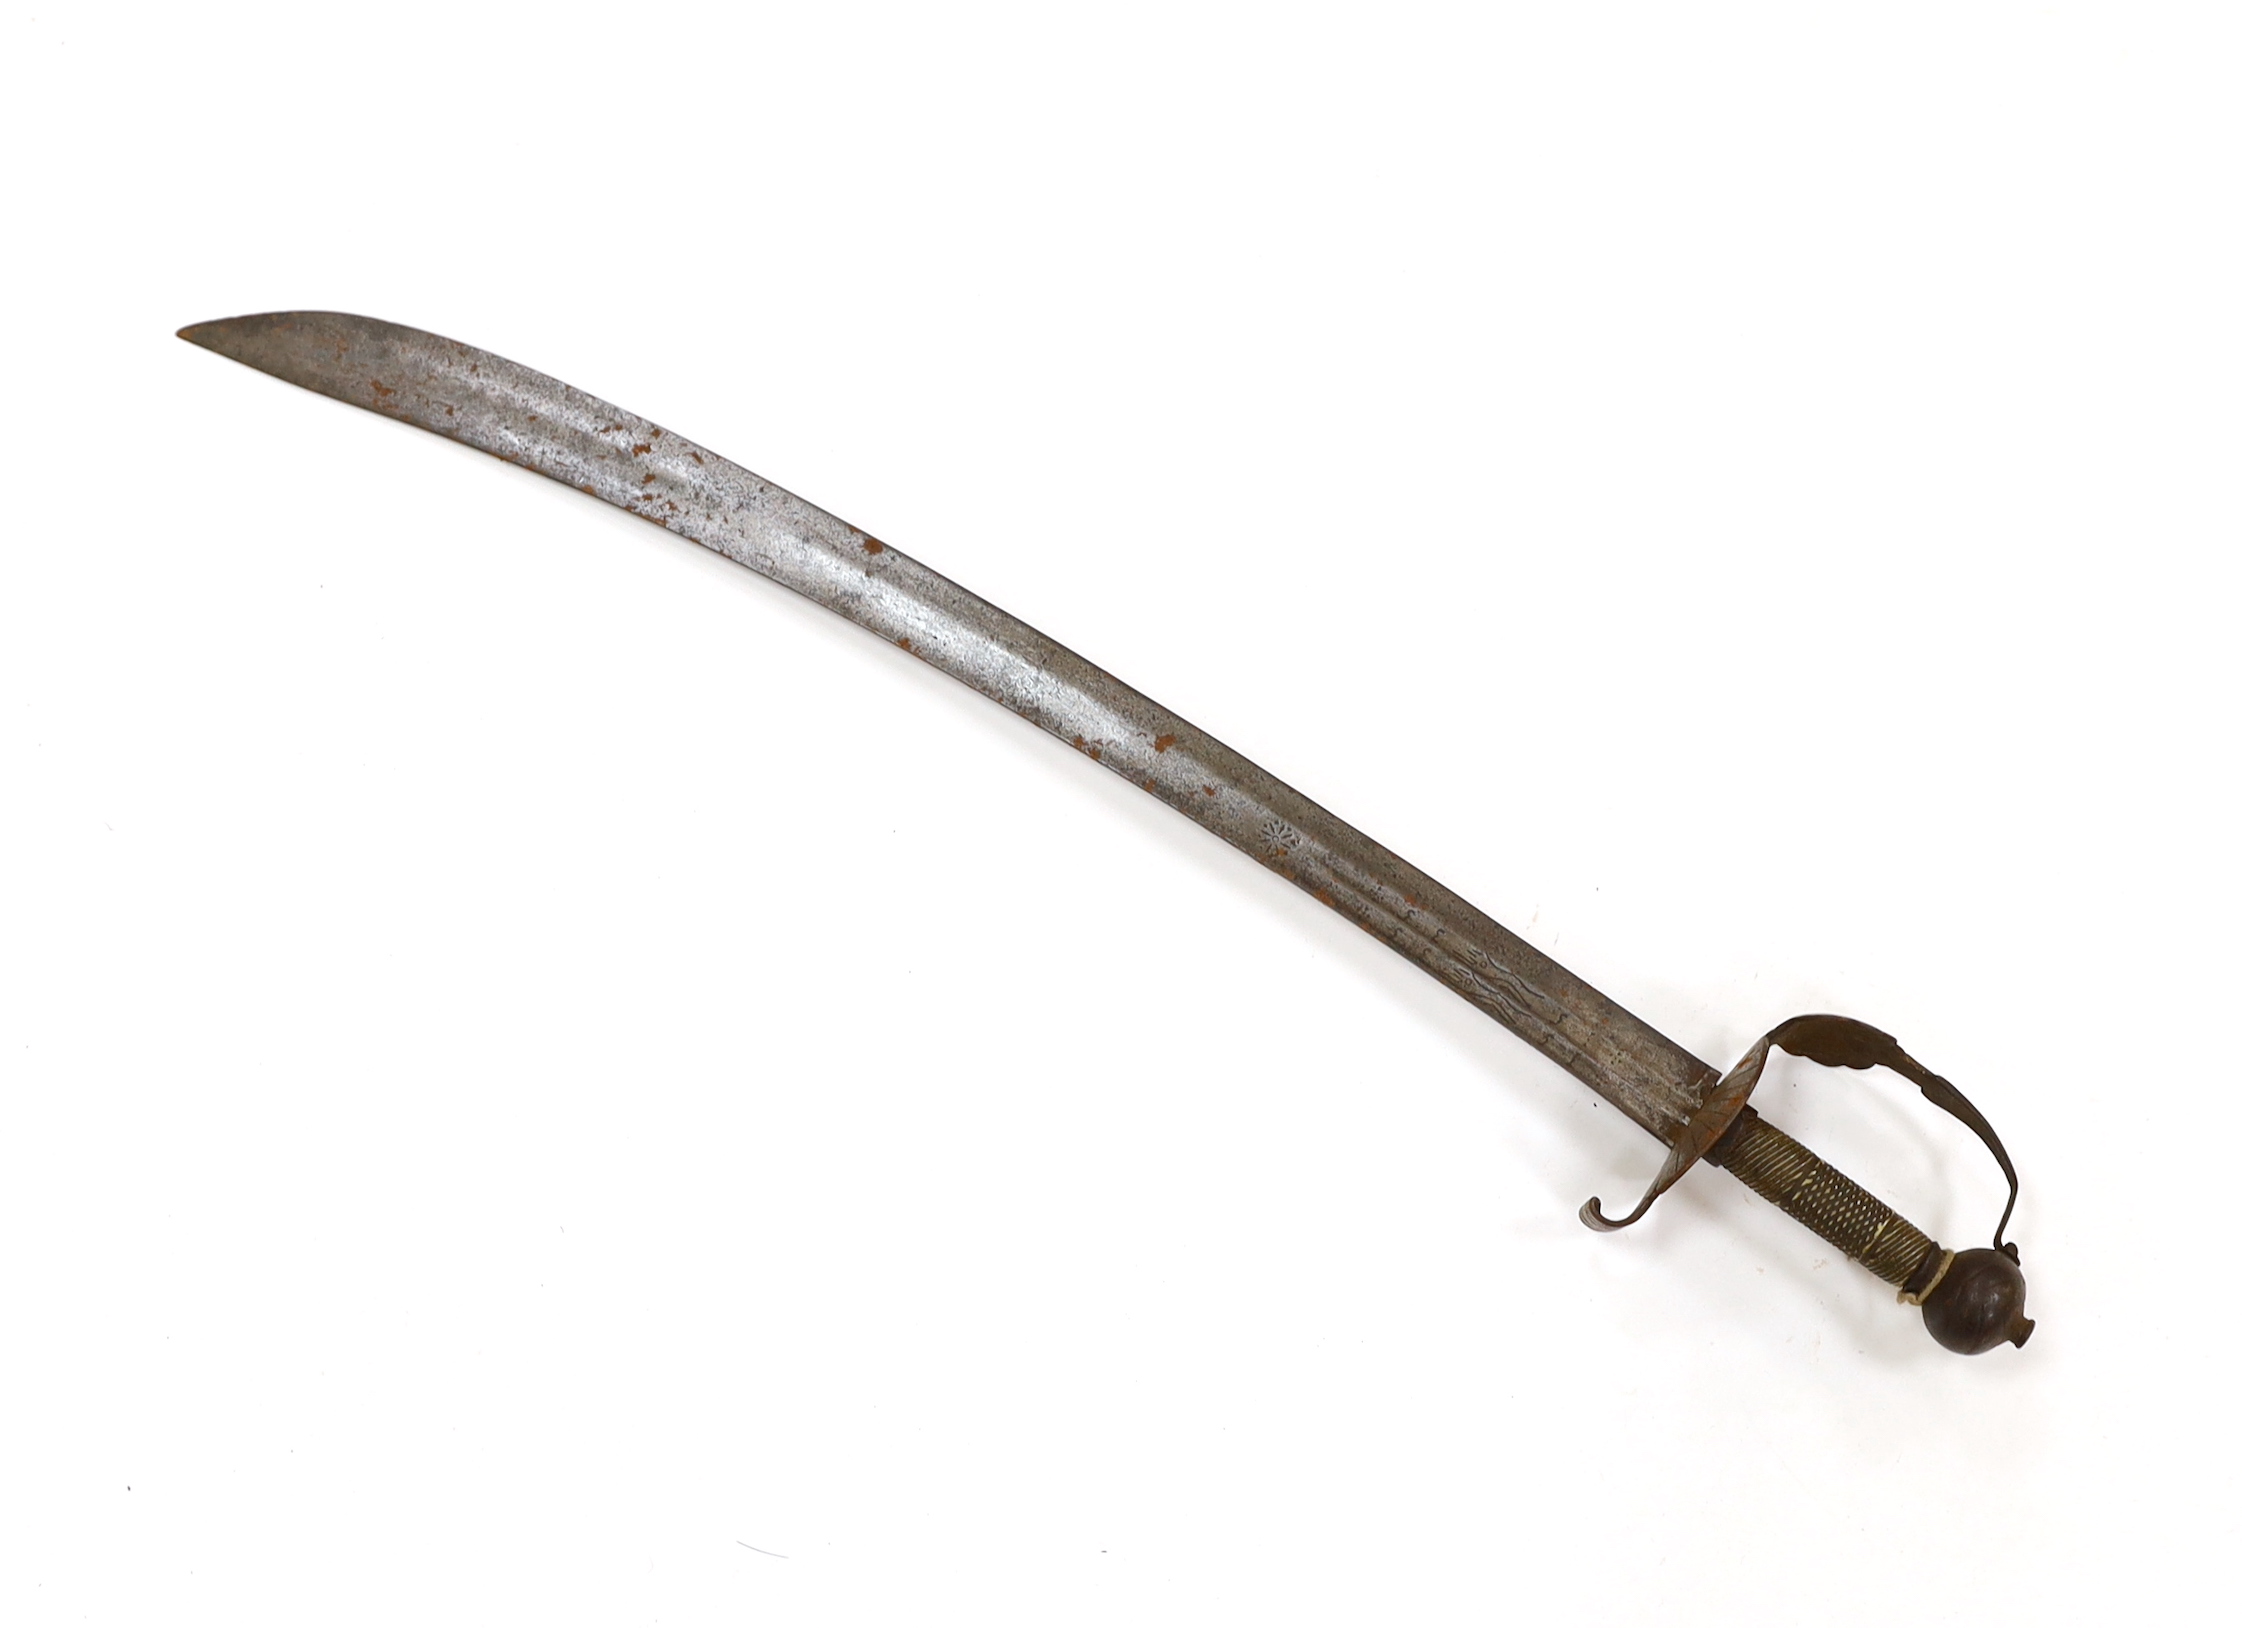 An English hangar, mid 17th century, curved fullered blade engraved with spurious date 1535 and running wolf mark, iron guard slightly reduced and swollen pommel, spirally carved and chequered bone grip, blade 67.5cm